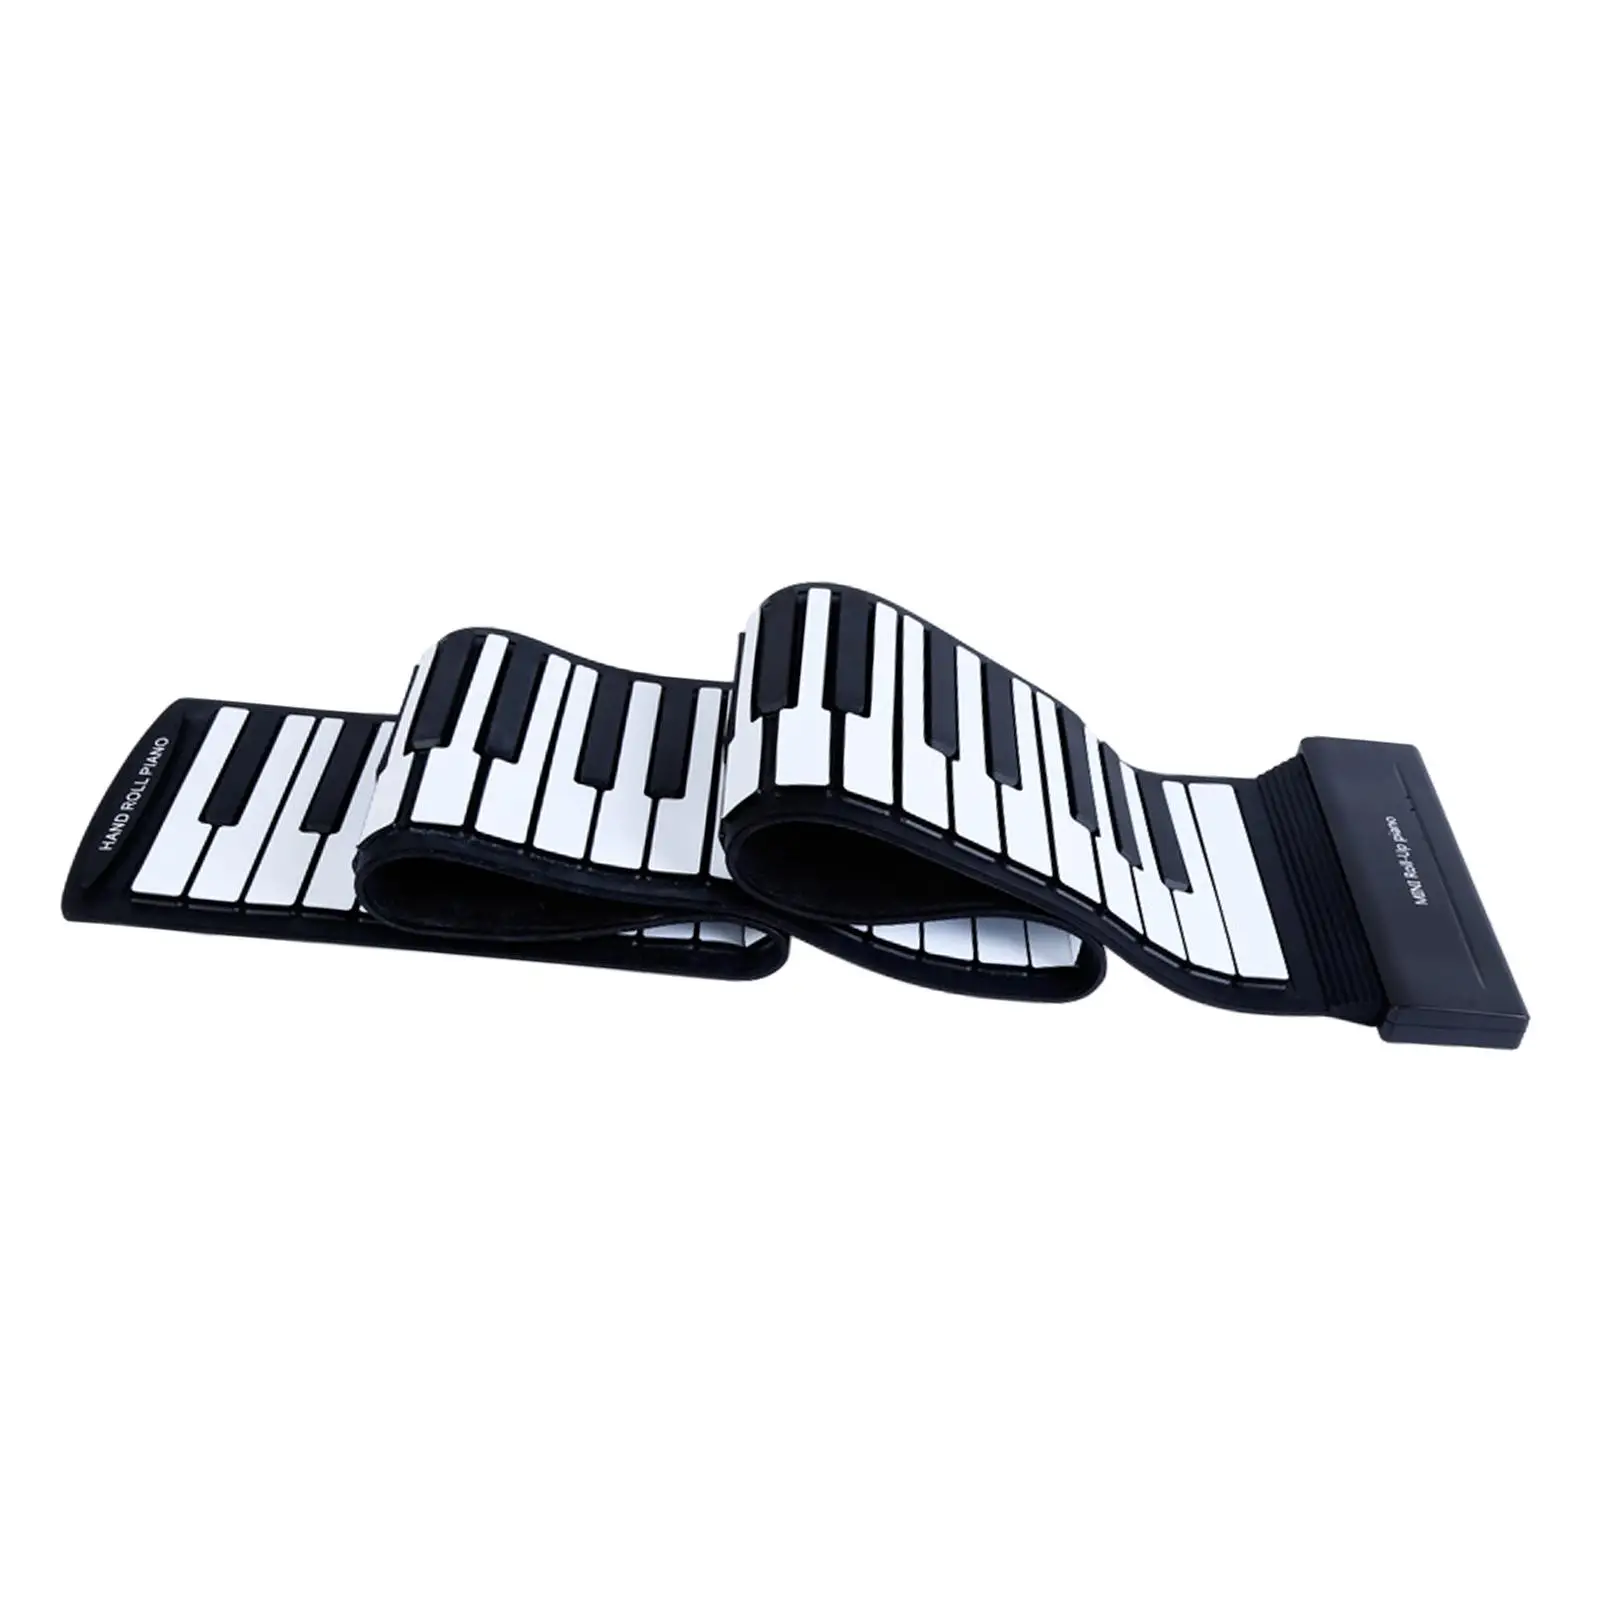 

88 Keys Roll up Flexible Piano Foldable Multipurpose Digital Music Toy for Travel Gifts Programming Classroom Teaching Children